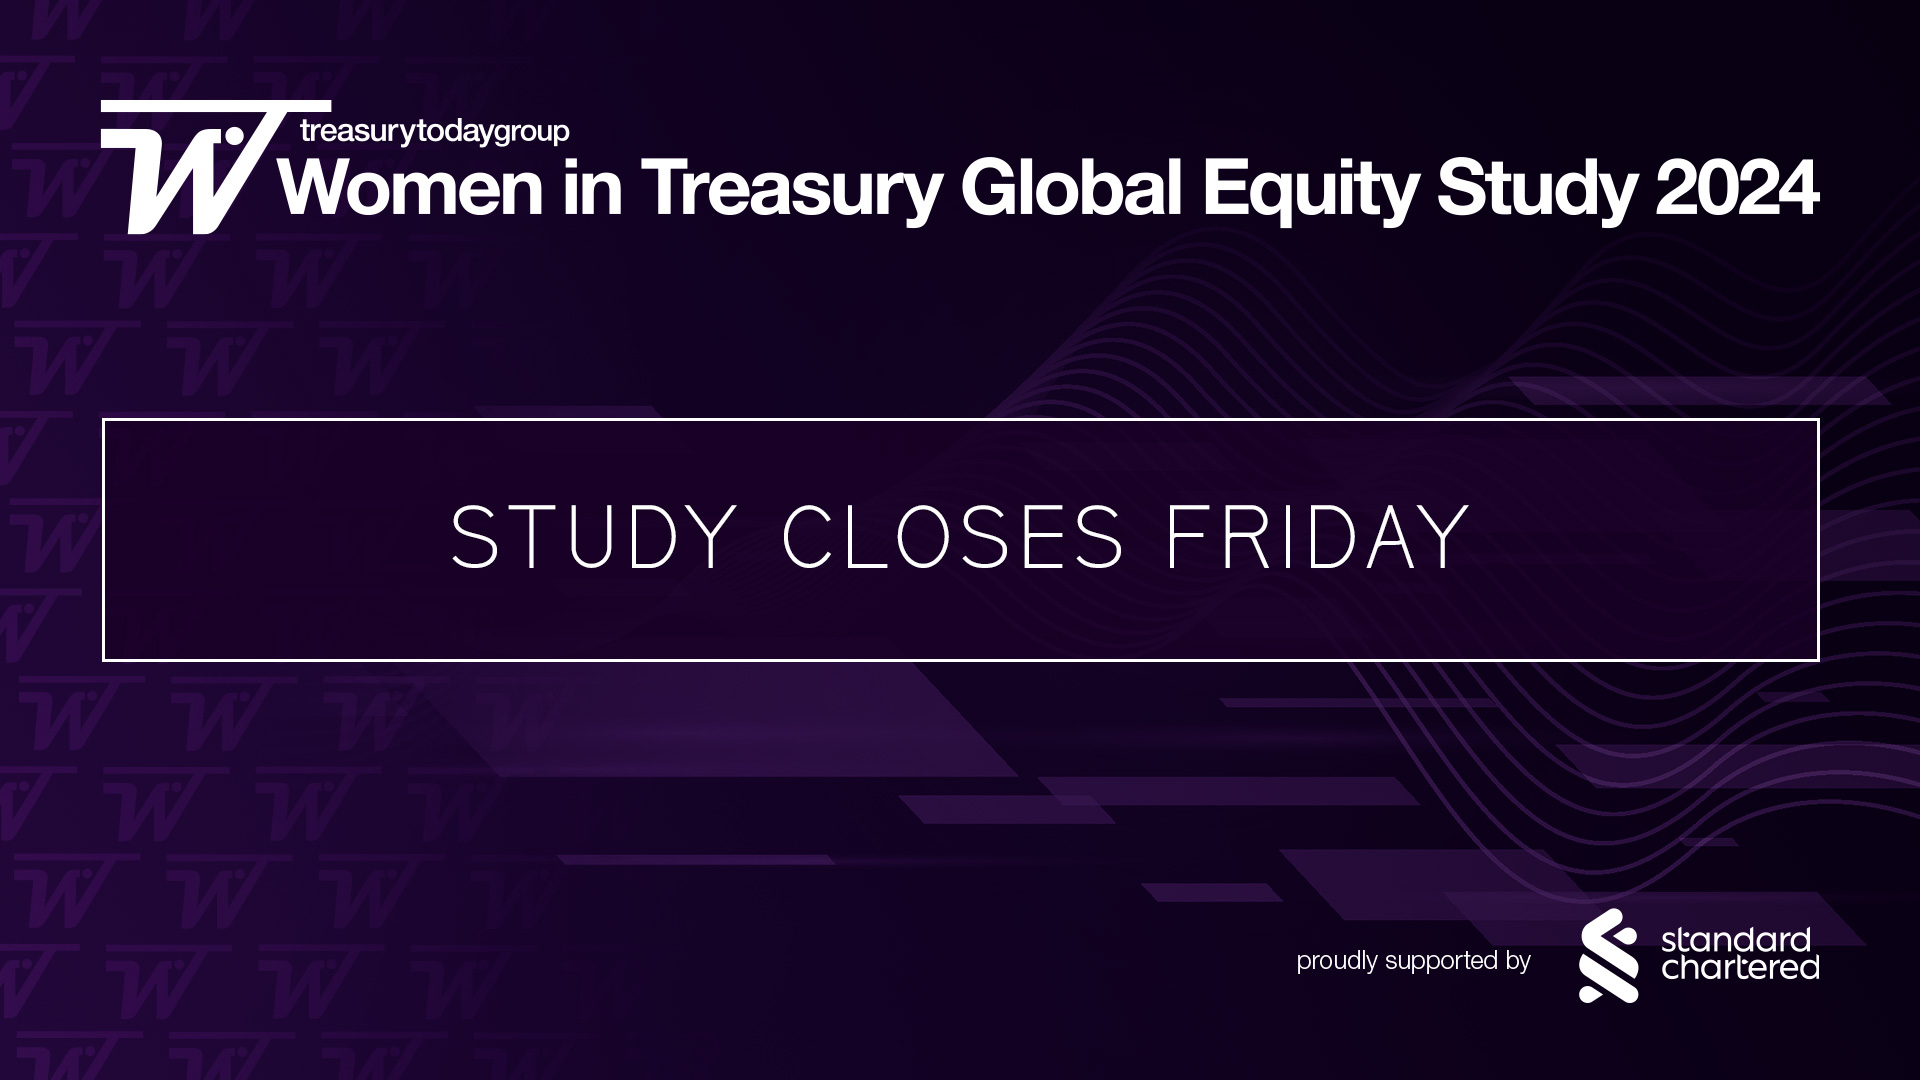 Women in Treasury Global Equity Study 2024 proudly supported by Standard Chartered study closes Friday